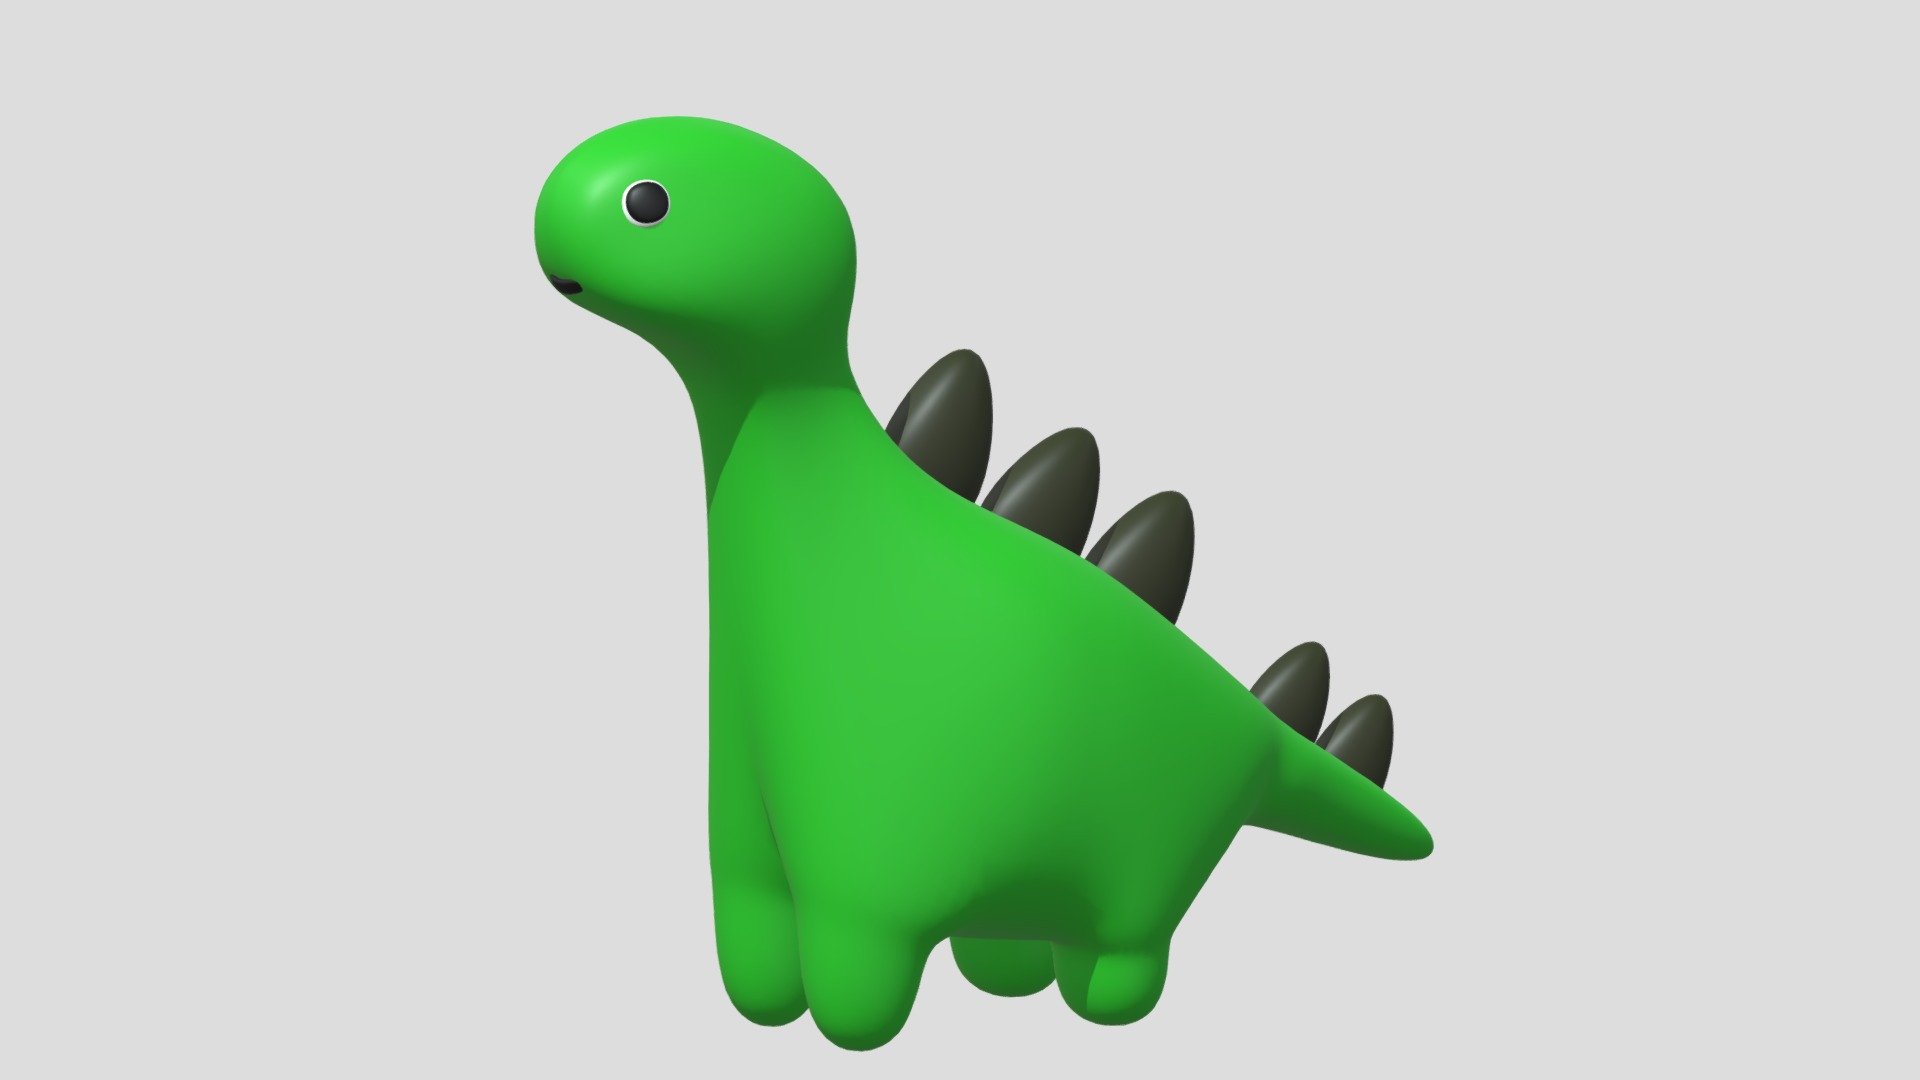 -Cartoon Cute Dinosaur Toy.

-This product contains 11 objects.

-Verts : 12,694 Faces : 12,672.

-Materials have the correct names.

-This product was created in Blender 2.8

-Formats: blend, fbx, obj, c4d, dae, abc, stl, glb, unity.

-We hope you enjoy this model.

-Thank you 3d model